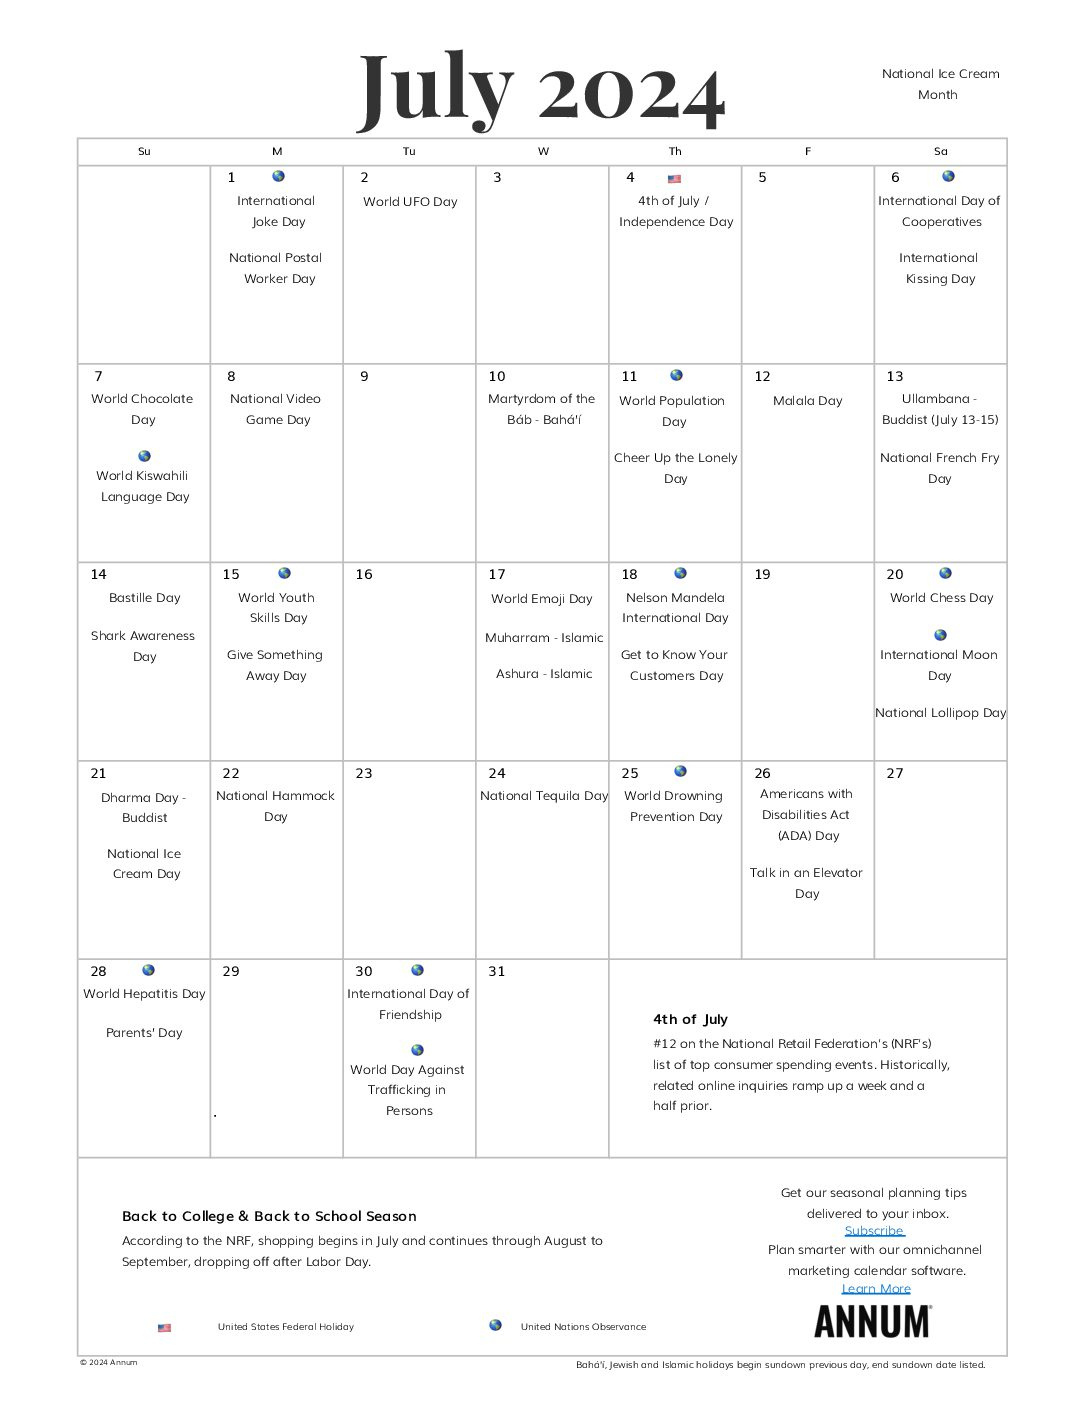 Printable July 2024 Calendar | July Holidays | Annum for July 2024 Calendar of Events